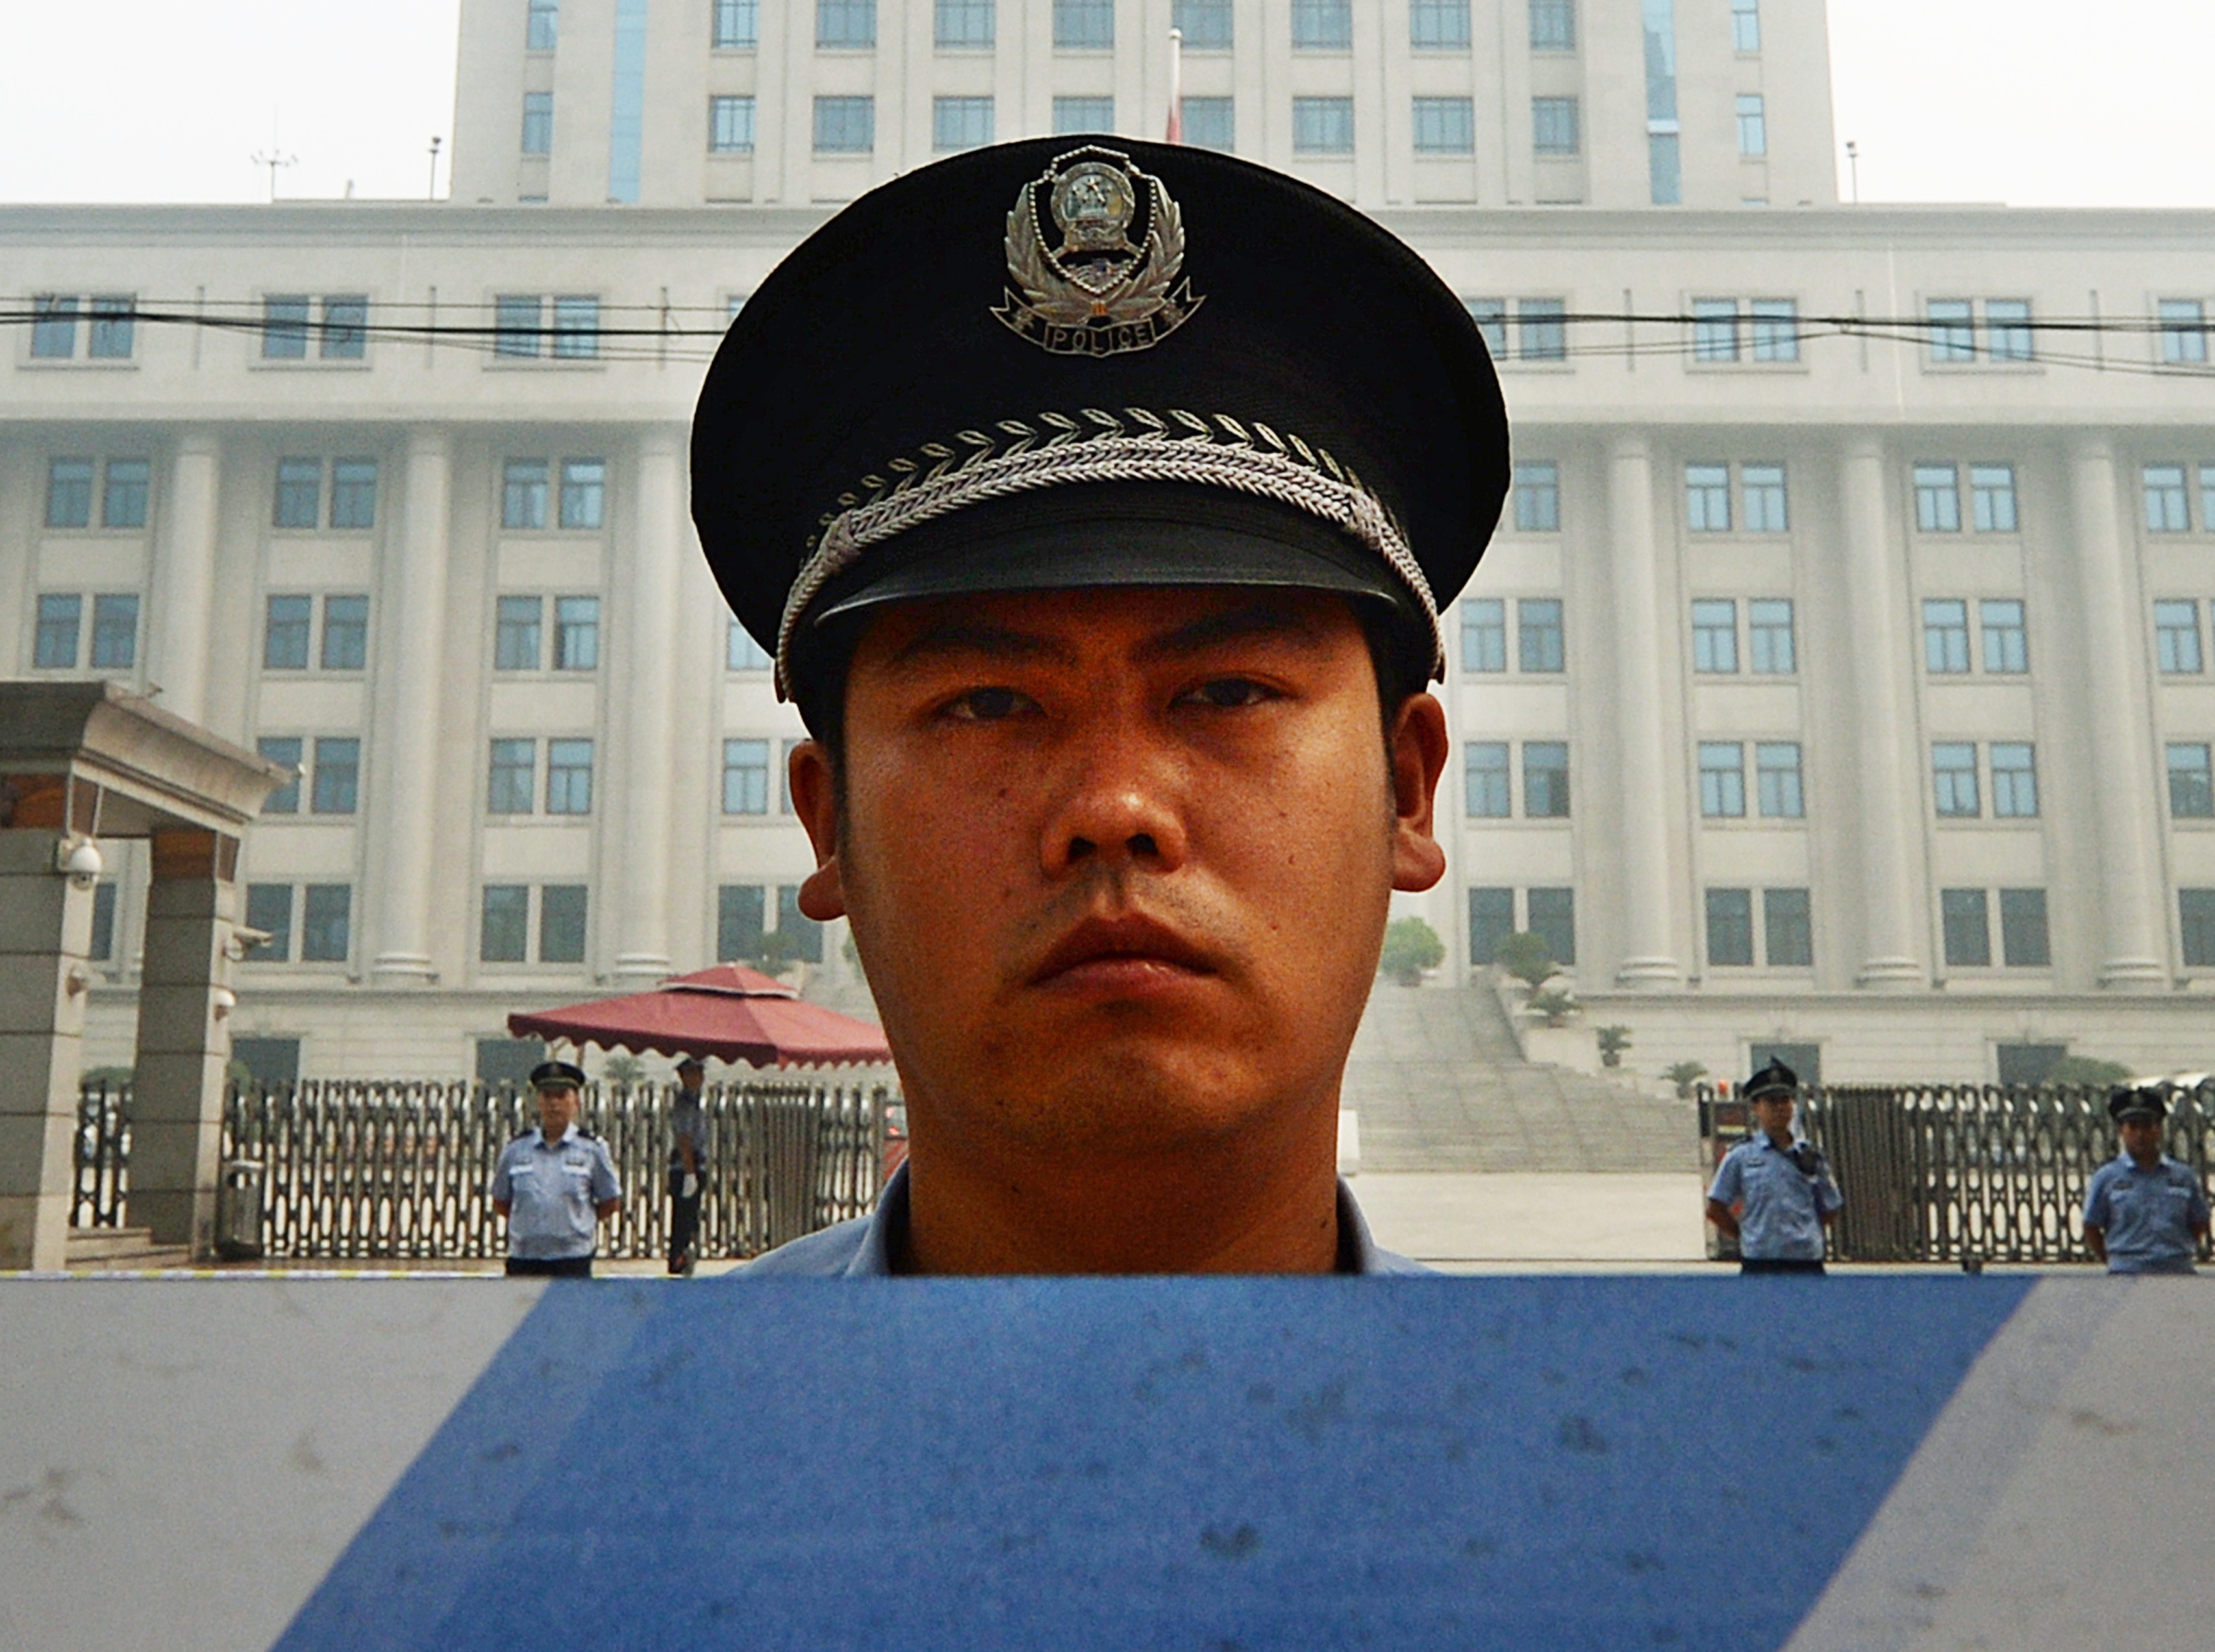 Police stand guard during the third day of the trial of disgraced official Bo Xilai at the Intermediate People's Court in Jinan, Shandong province, on Aug. 24, 2013. (Mark Ralston—AFP/Getty Images)